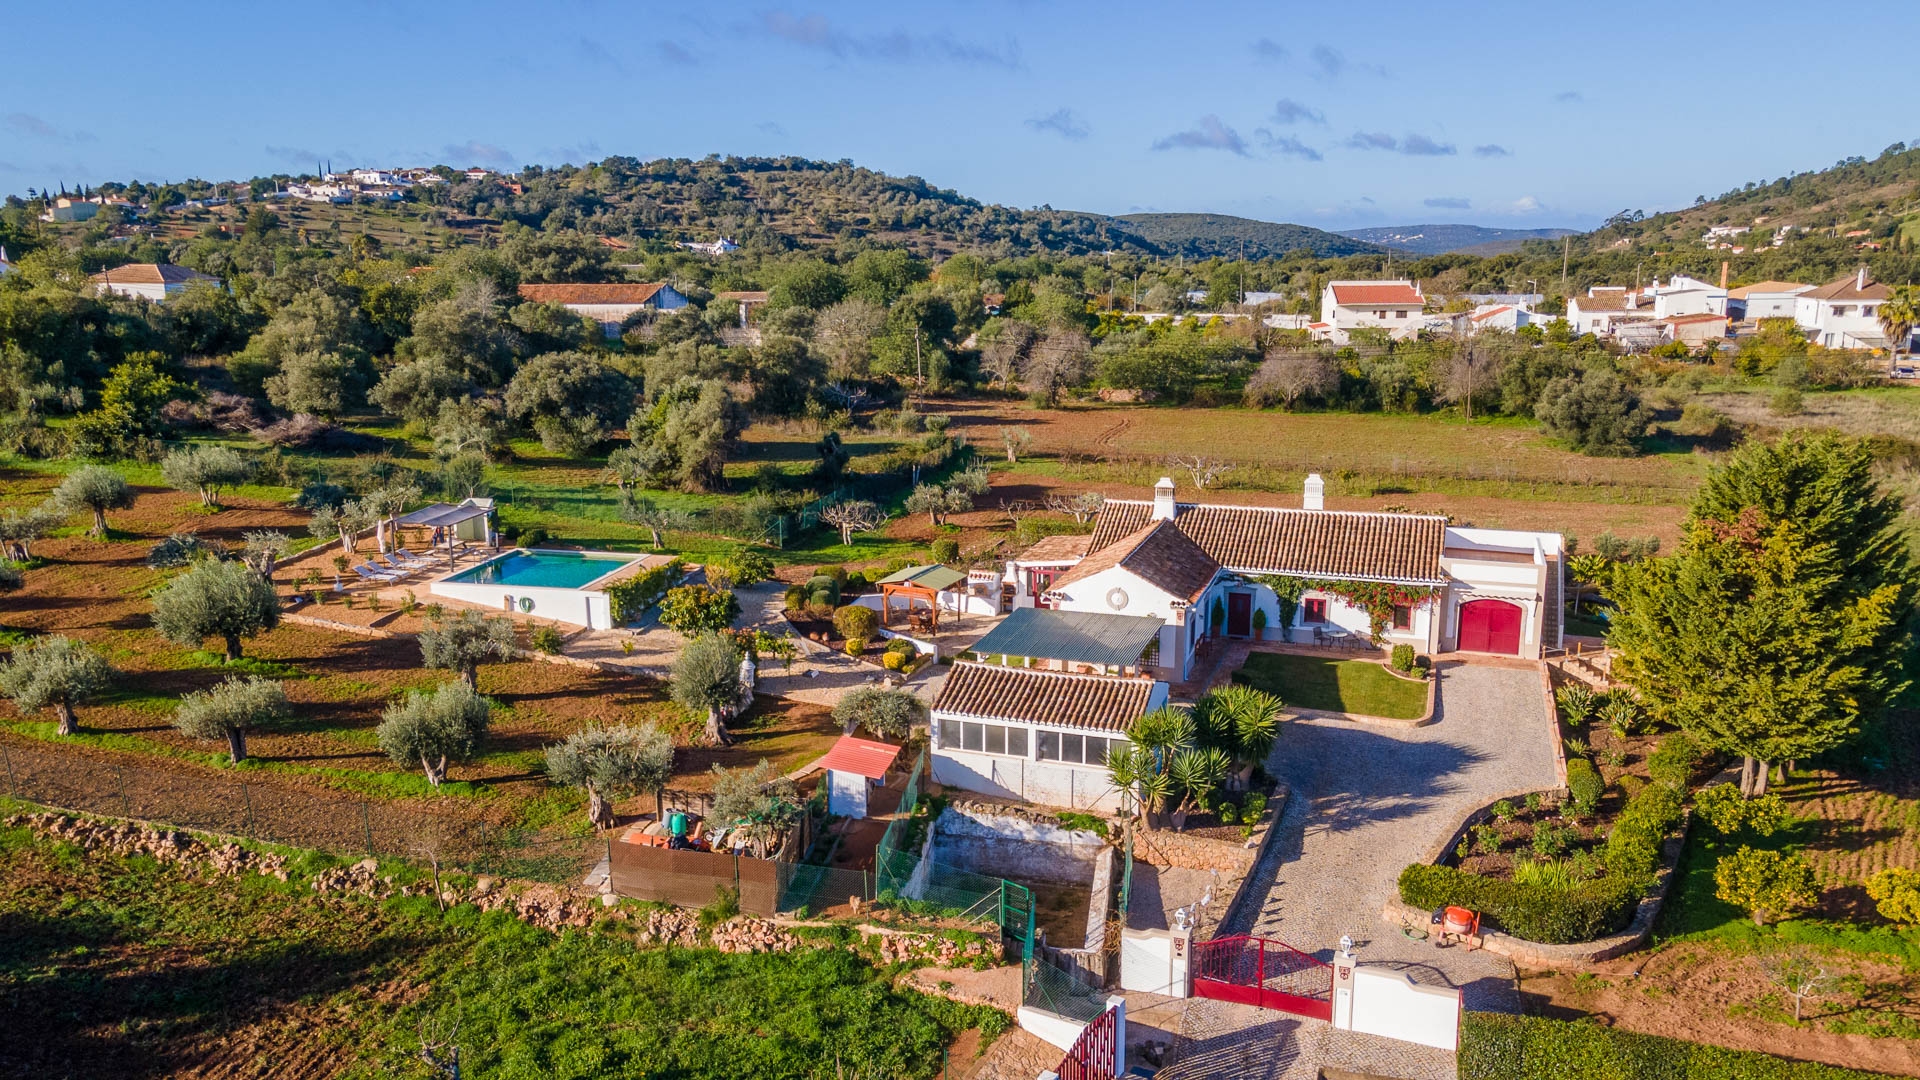 Traditional Style Quinta with 3 Bedrooms, Pool, Annex and Large Plot near São Brás | VM1875 Traditional house in the countryside with large plot perfect for growing vegetables and fruit trees, keeping animals or just to have privacy from neighbours.